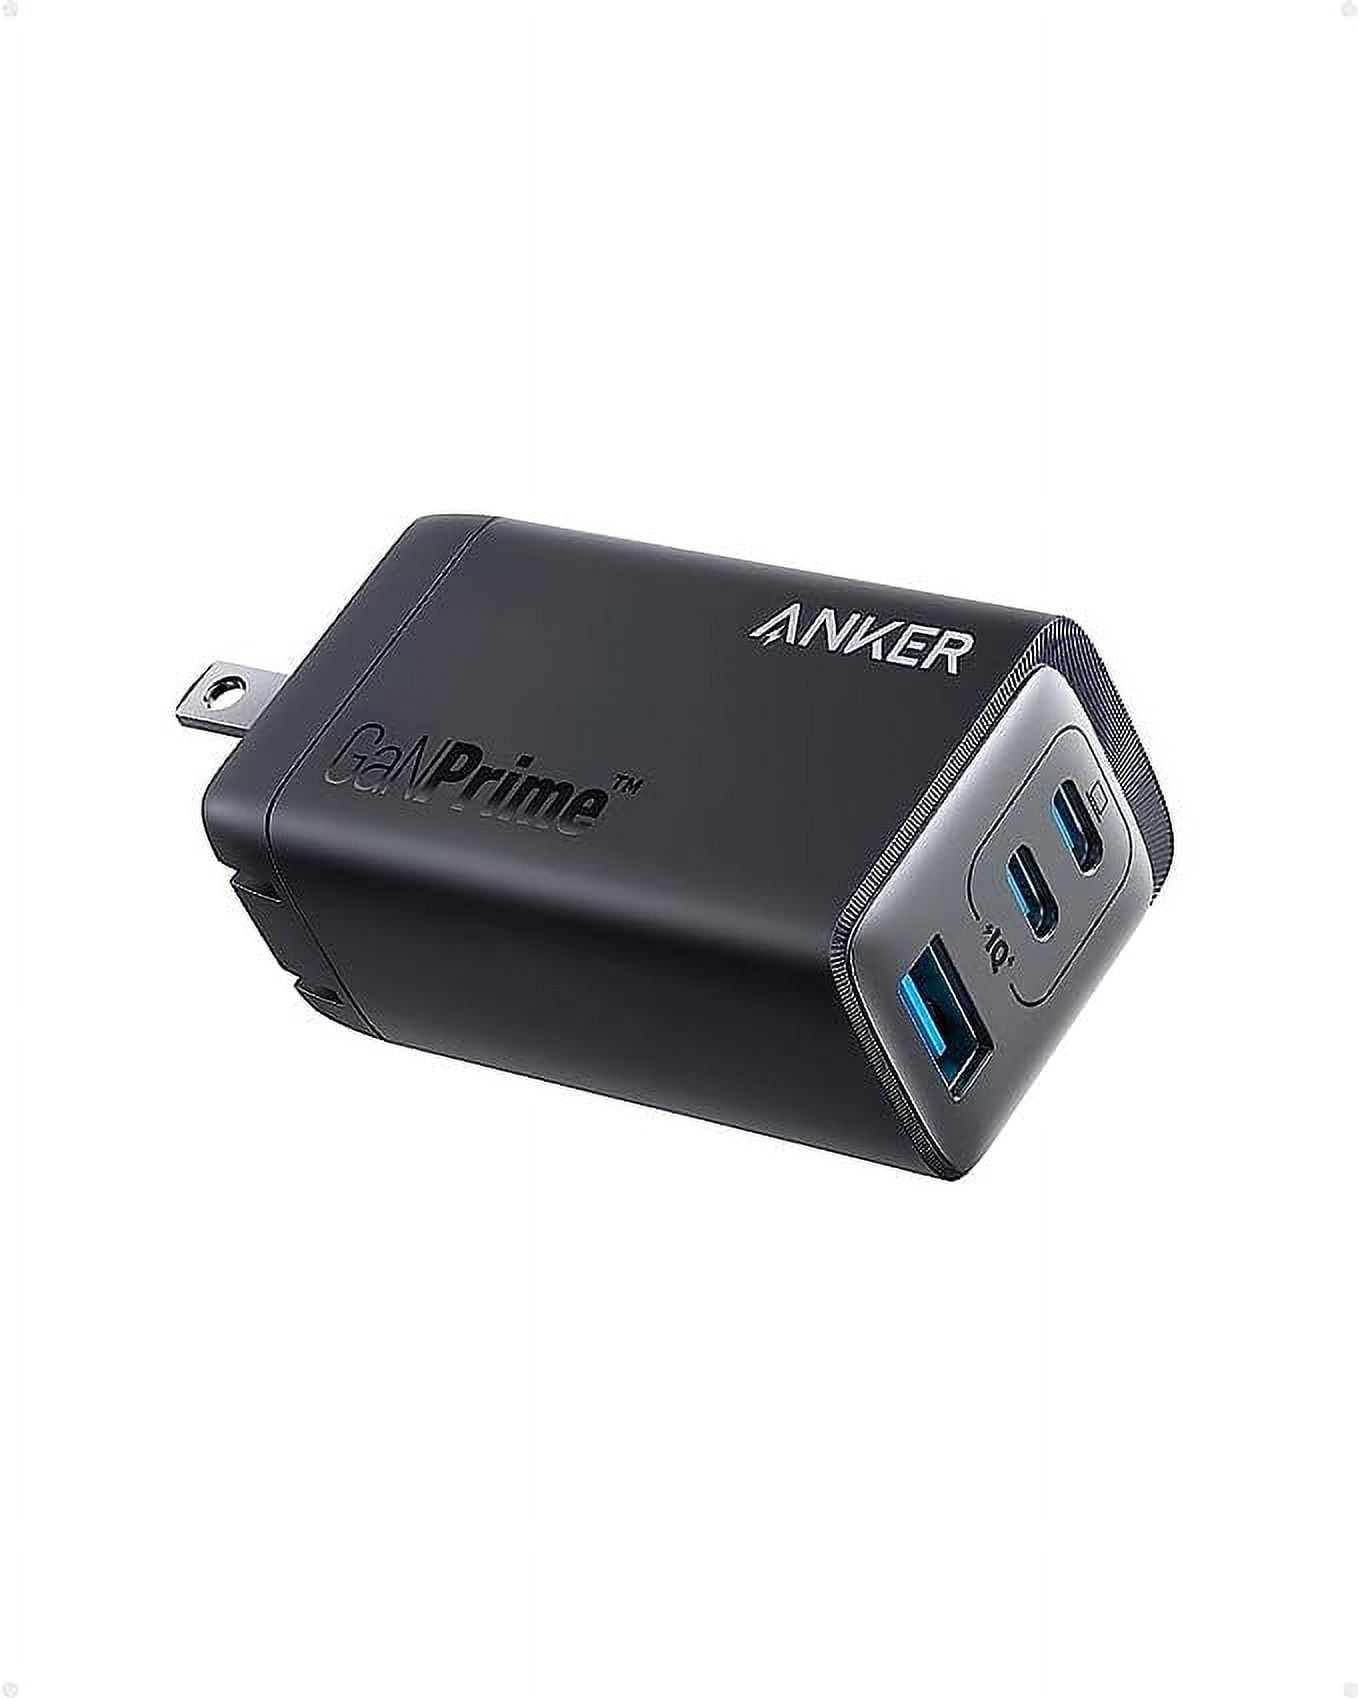 Anker 65W USB-C Charger, GaNPrime, 3 Ports for MacBook Pro/Air, iPad Pro,  Galaxy, iPhone, Pixel, and More 